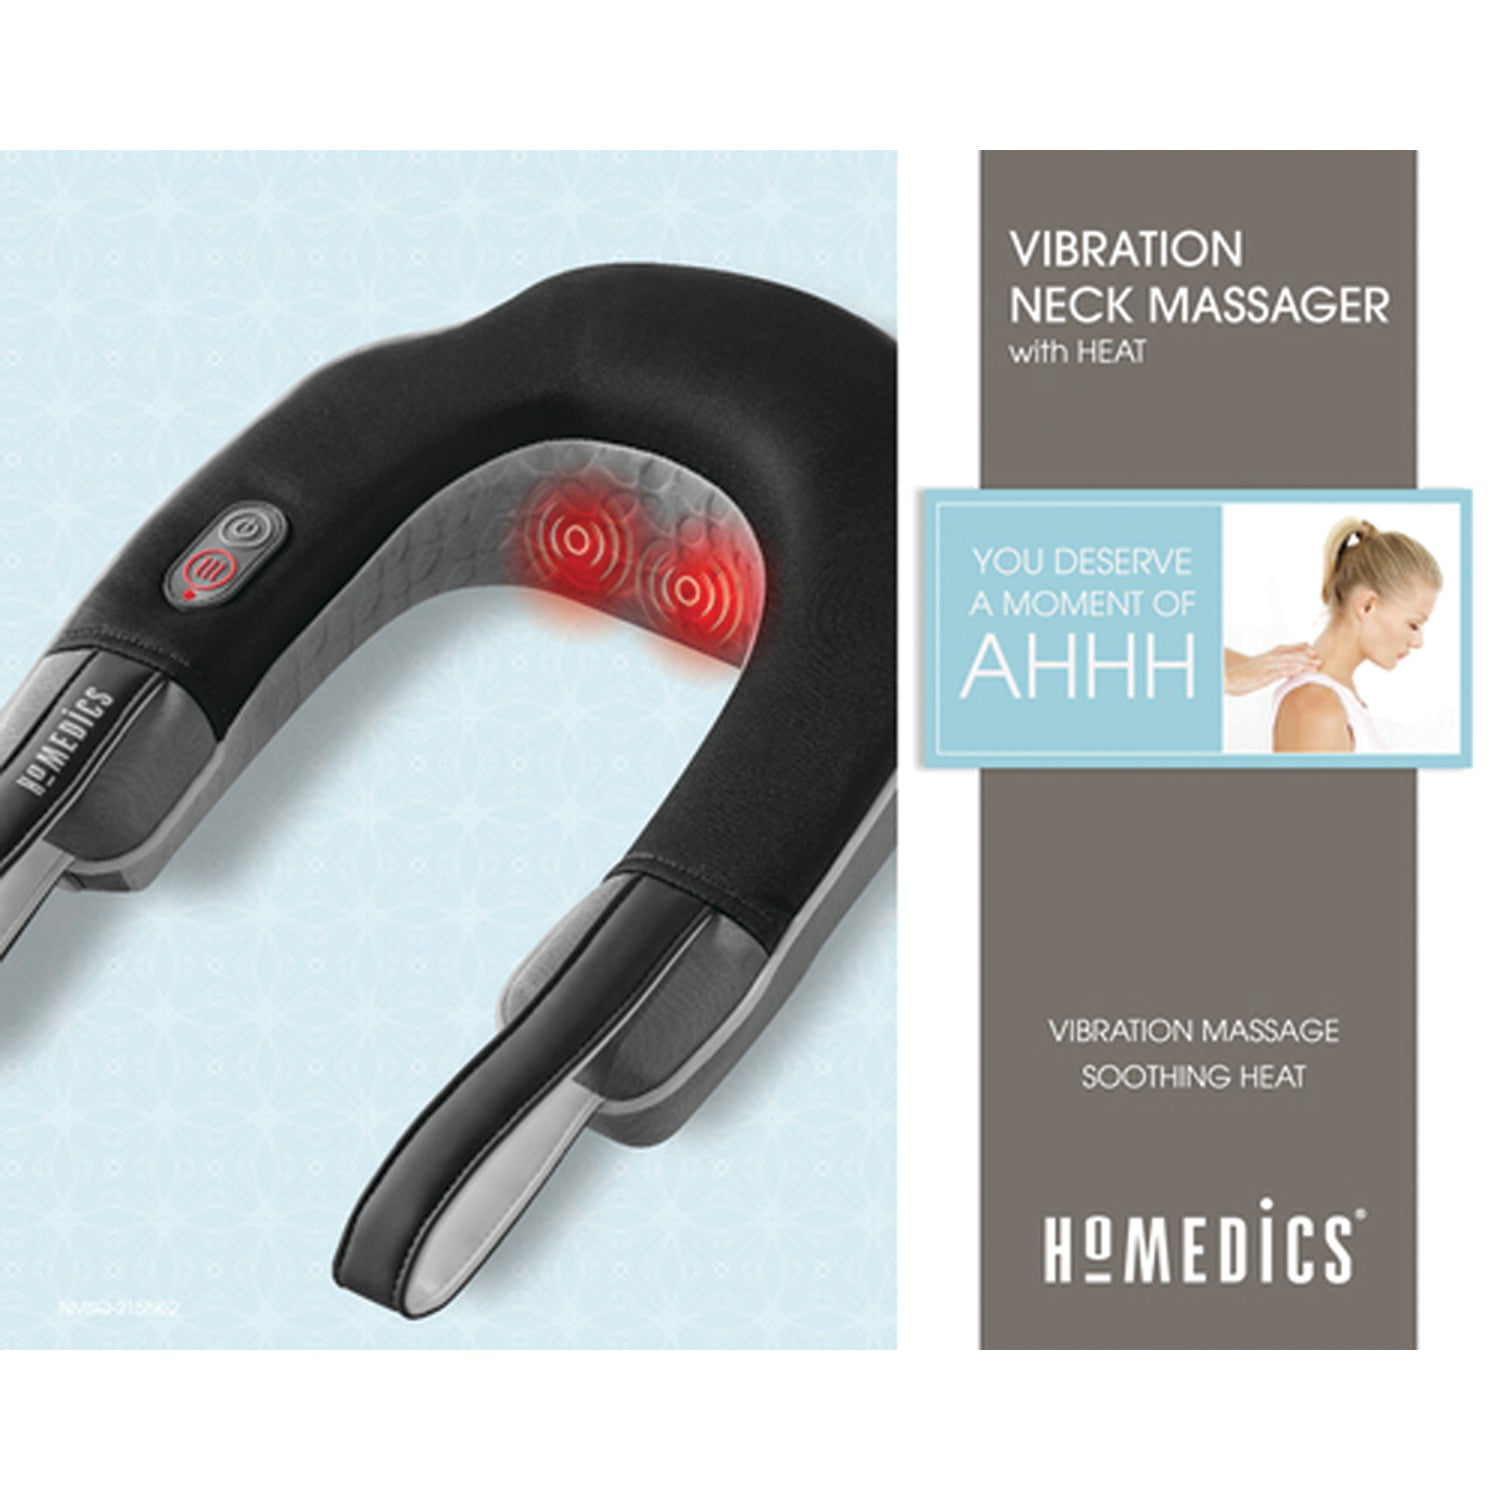 Homedics Neck and Shoulder Massager with Heat Model No. NMSQ-200 In  Original Bo